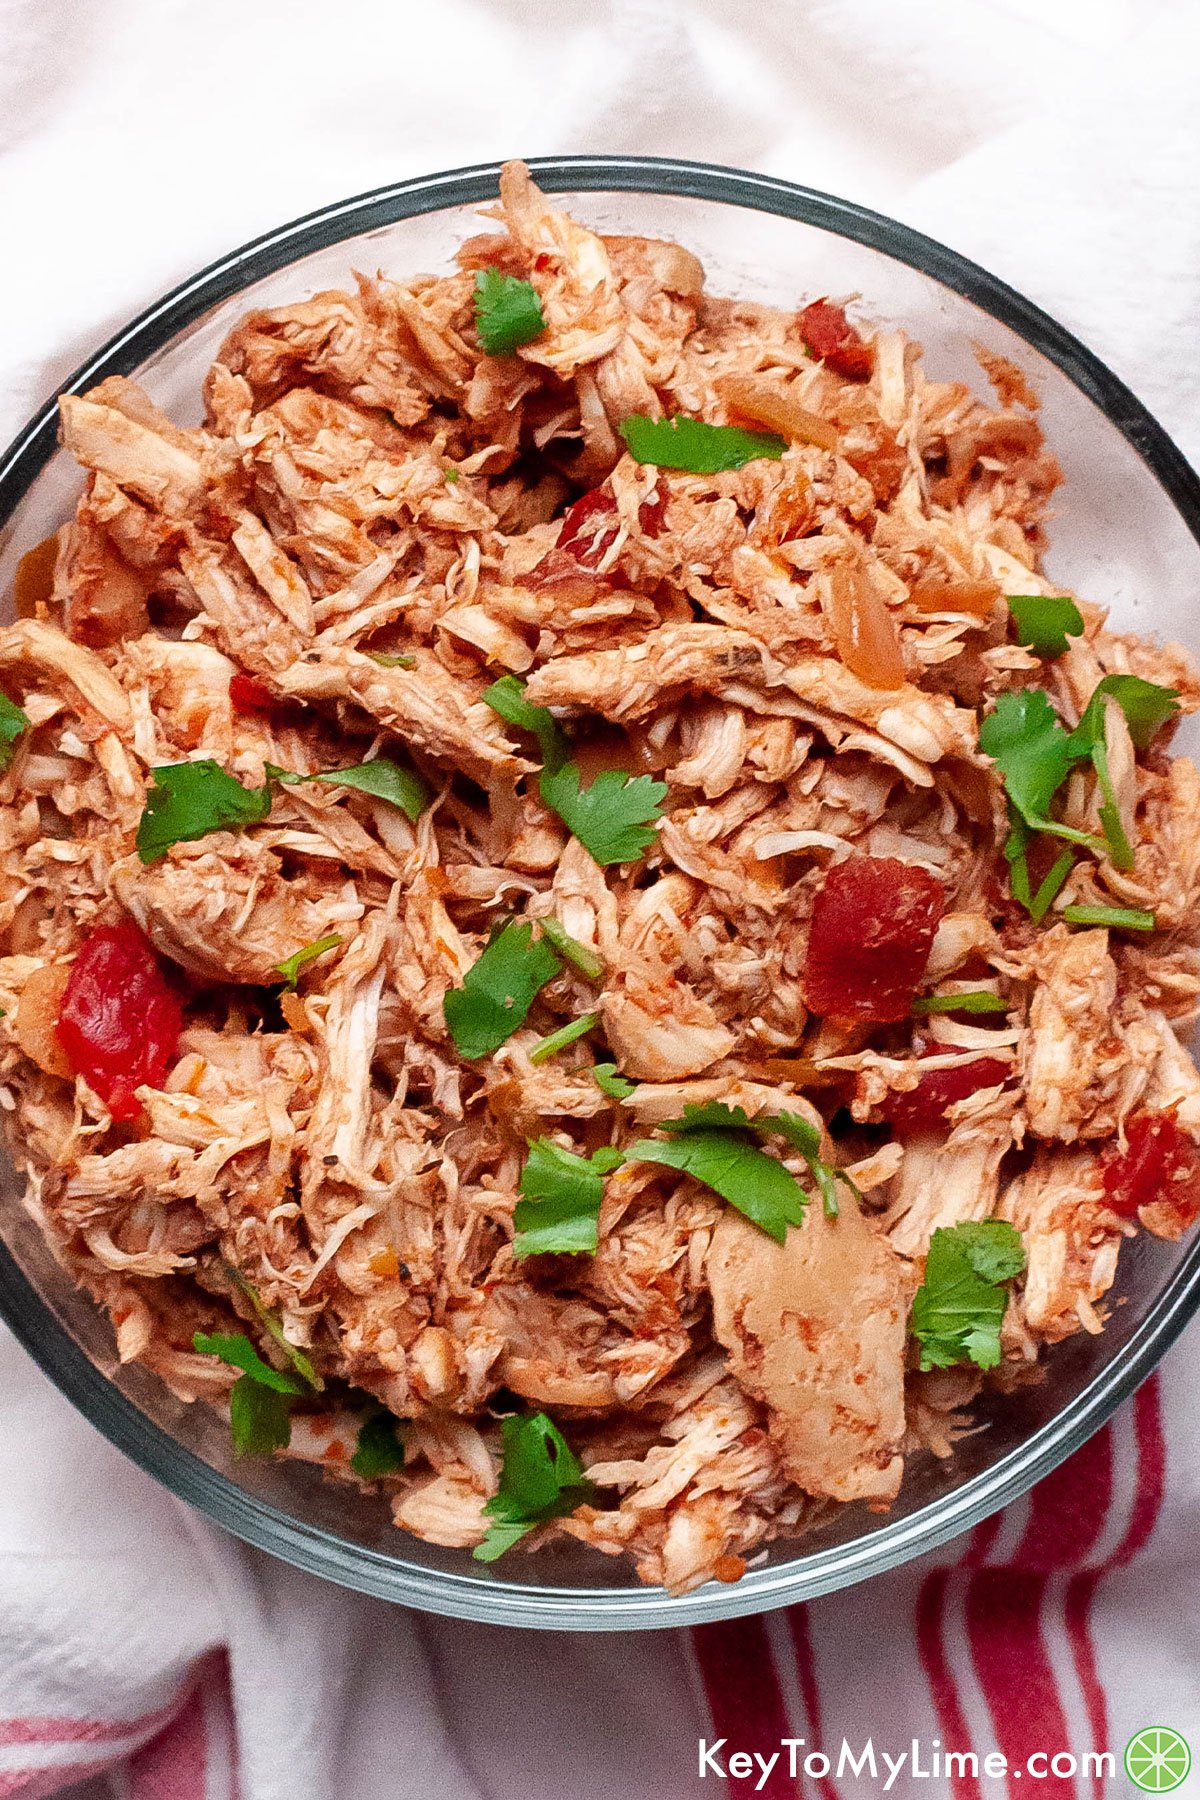 A close up image of a bowl of shredded slow cooker salsa chicken.